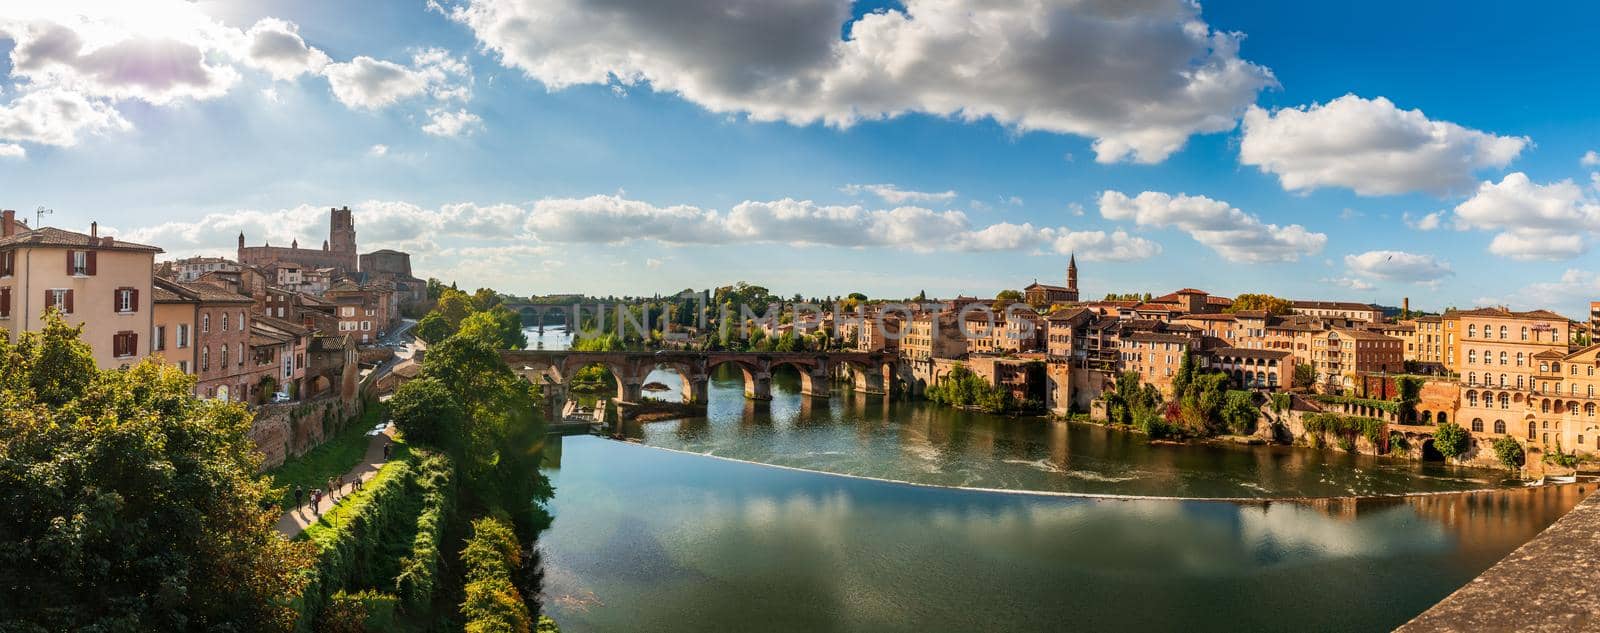 Albi is a commune in the south-west of France, capital of the Tarn department in the Occitanie region and the seat of the archdiocese of Albi, Castres and Lavaur. Historically and culturally, the town is in the Albigensian, a natural agricultural region.